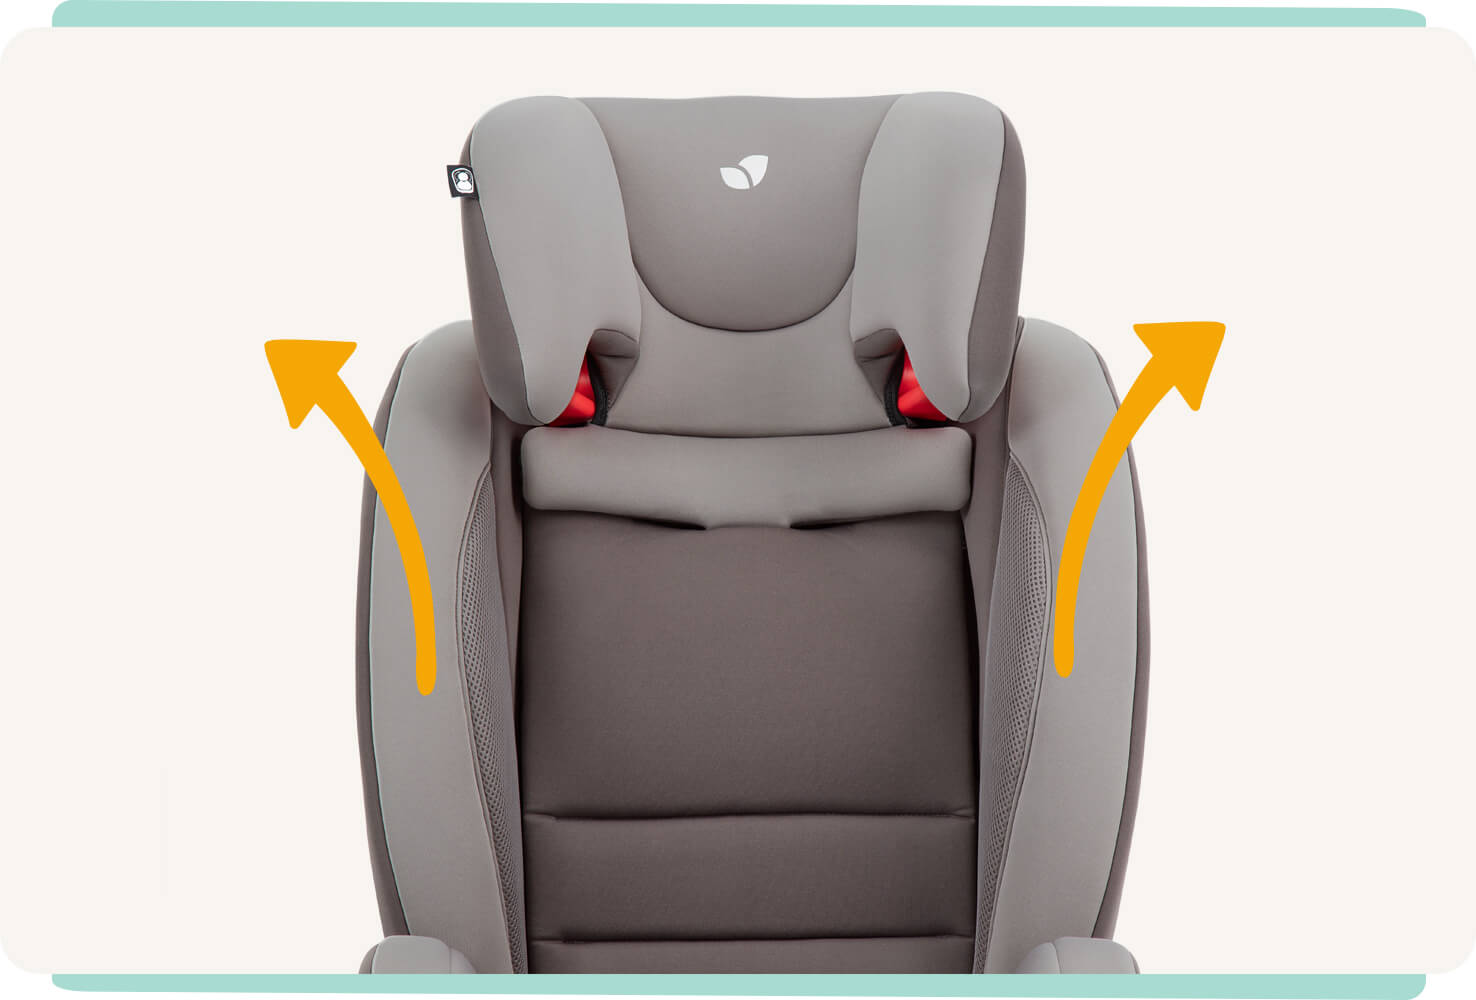 Front view of fortifi child car seat with headrest partially raised and two arrows pointing up and out.